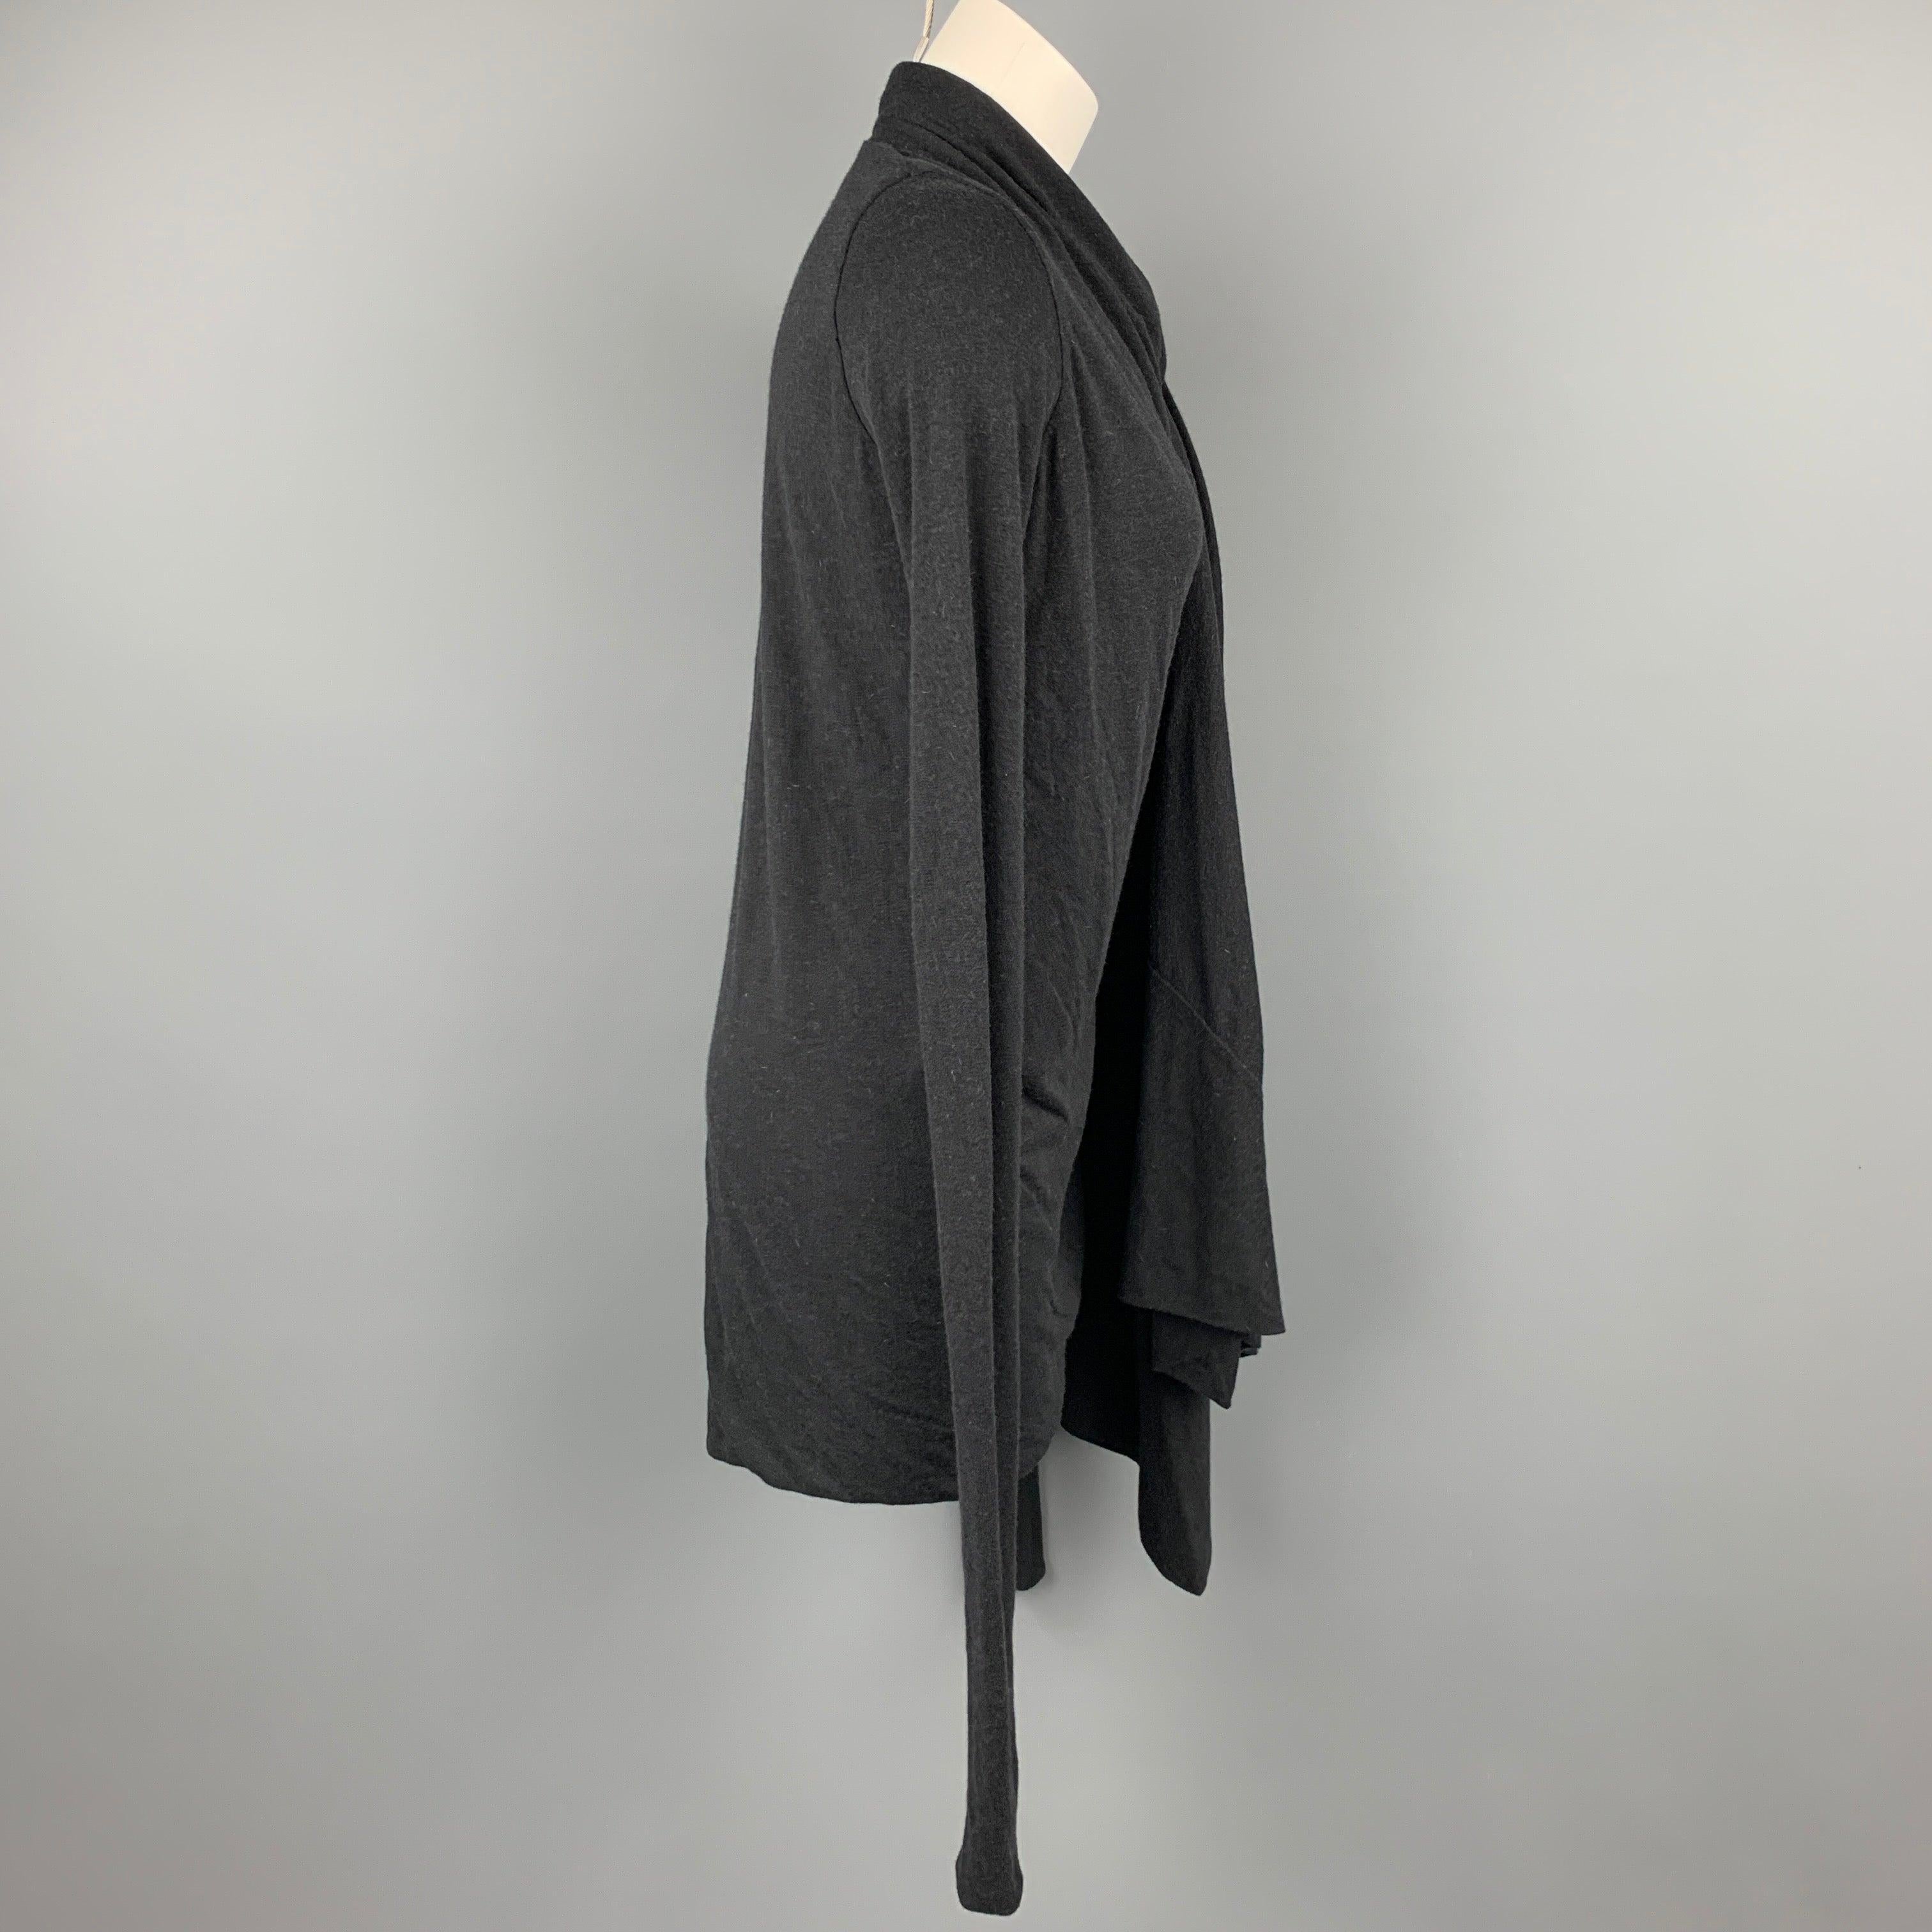 RICK OWENS Lilies One Size Charcoal Acetate Draped Cardigan In Good Condition For Sale In San Francisco, CA